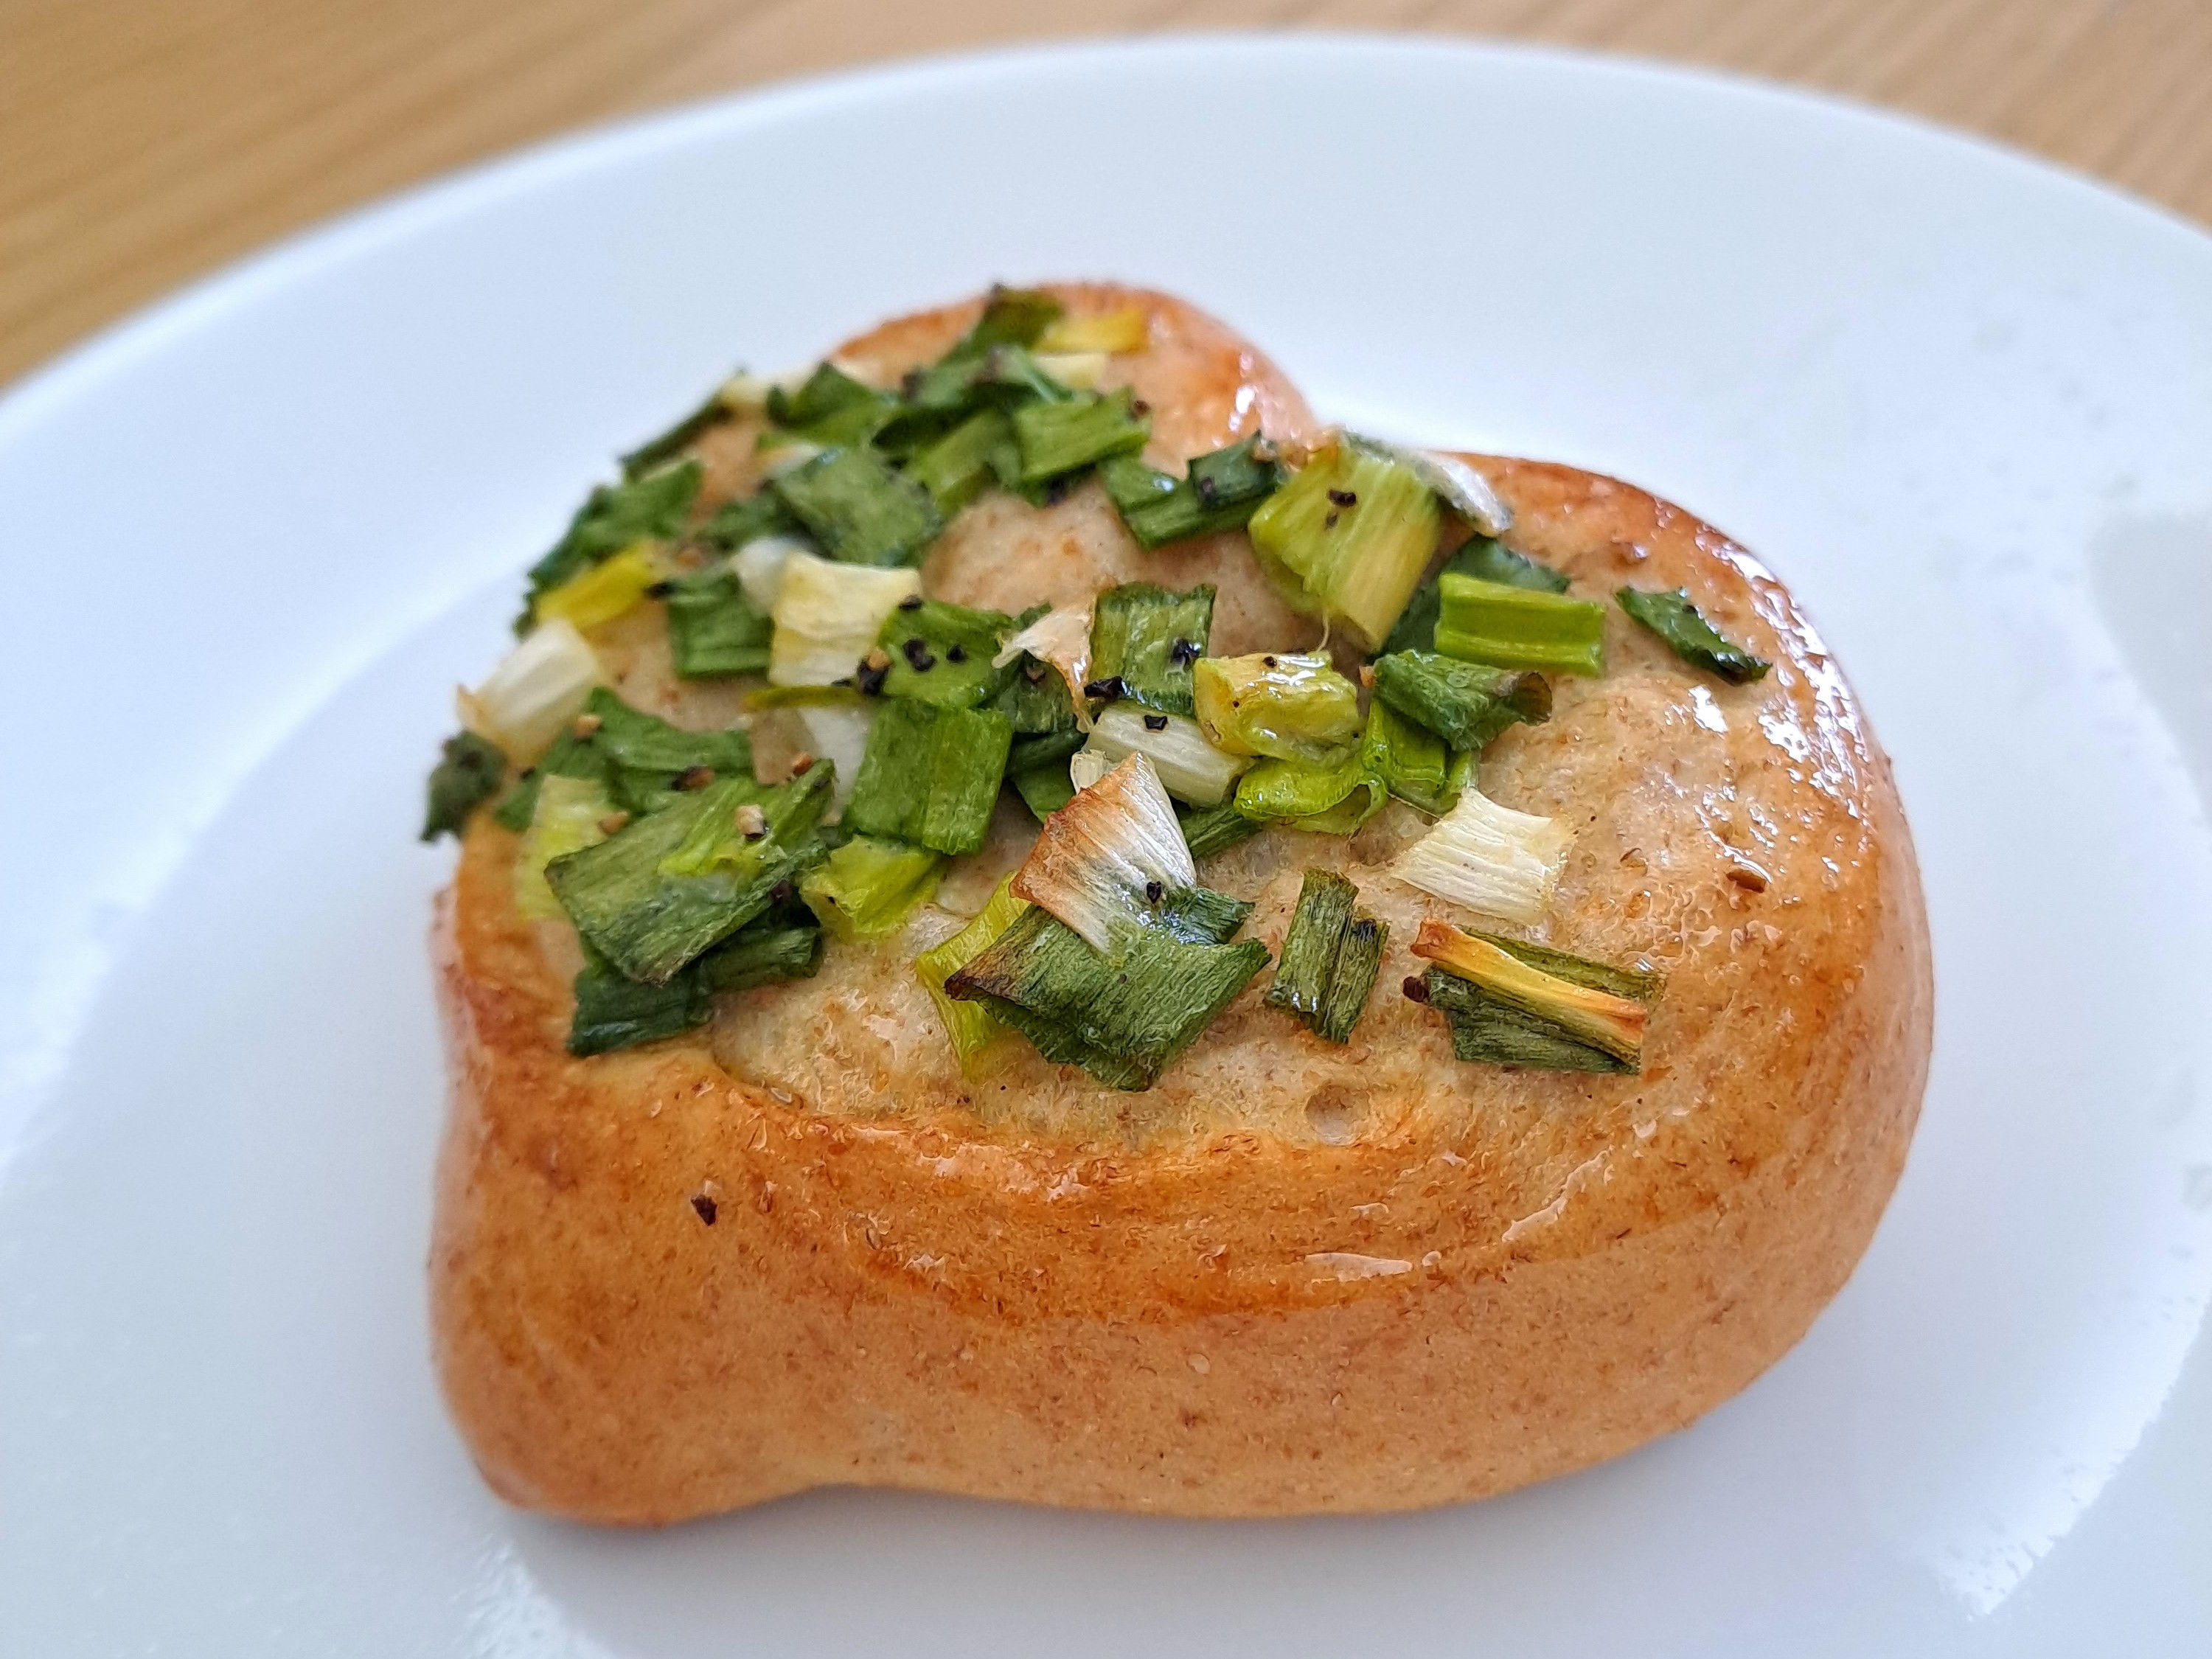 Green onion bread (you can easily make bread on working days)